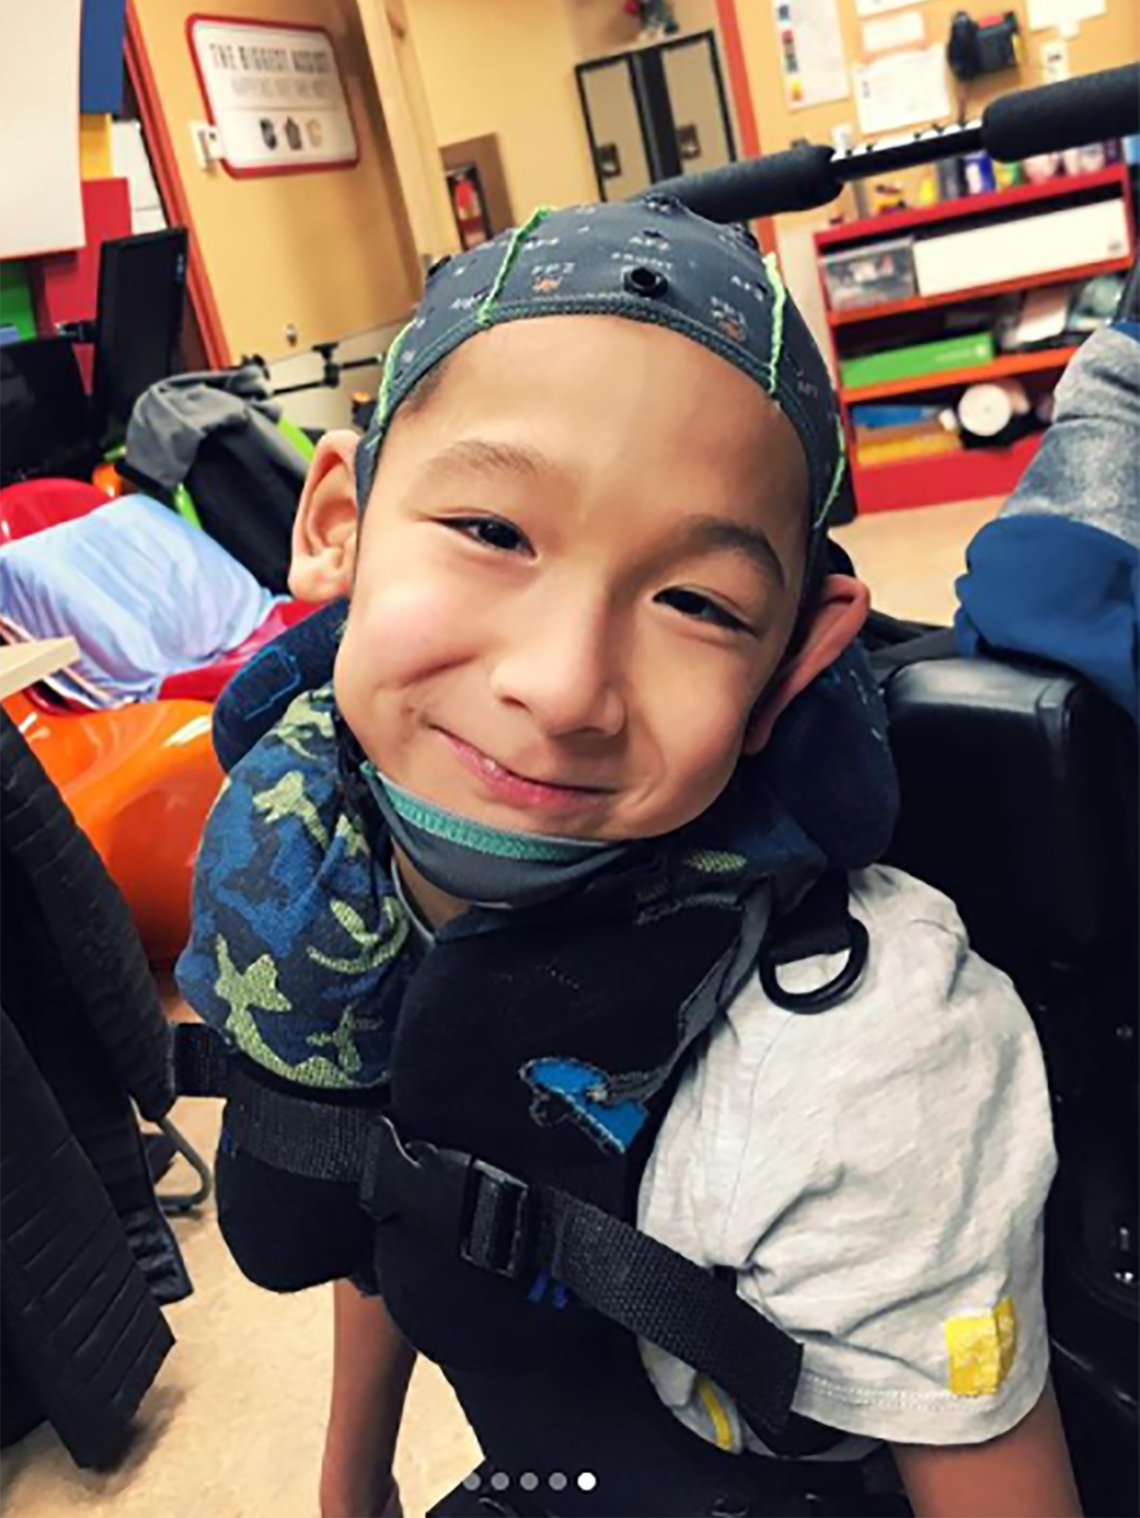 A boy with cerebral palsy wearing an EEG headcap